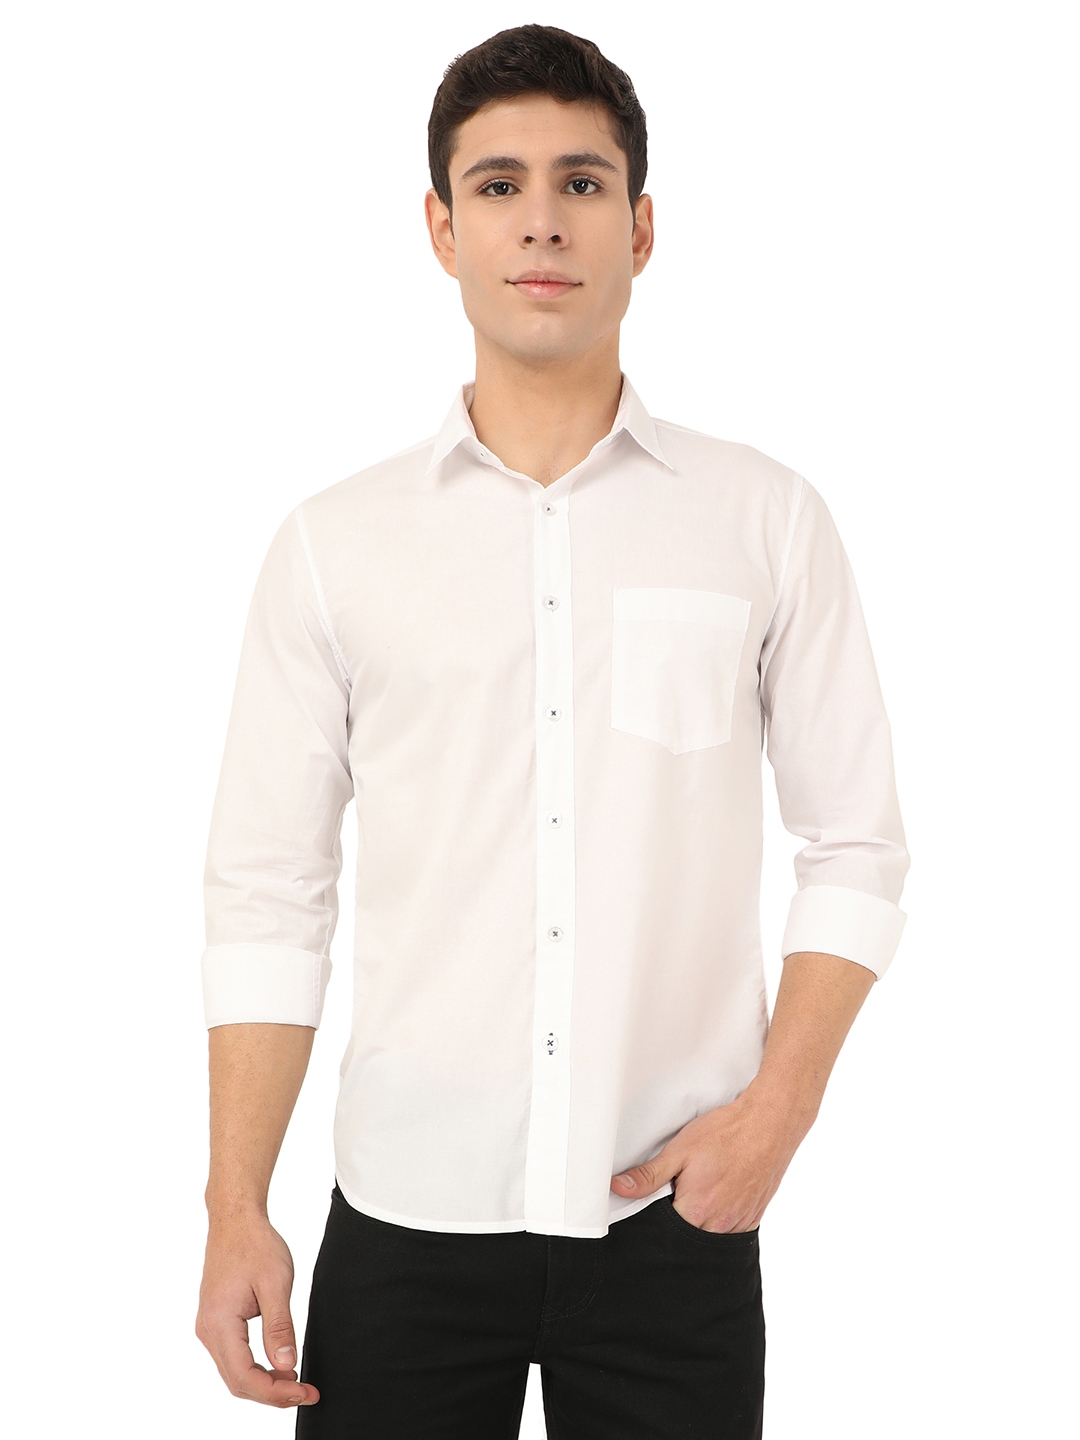 Greenfibre | Bright White Solid Slim Fit Semi Casual Shirt | Greenfibre 0